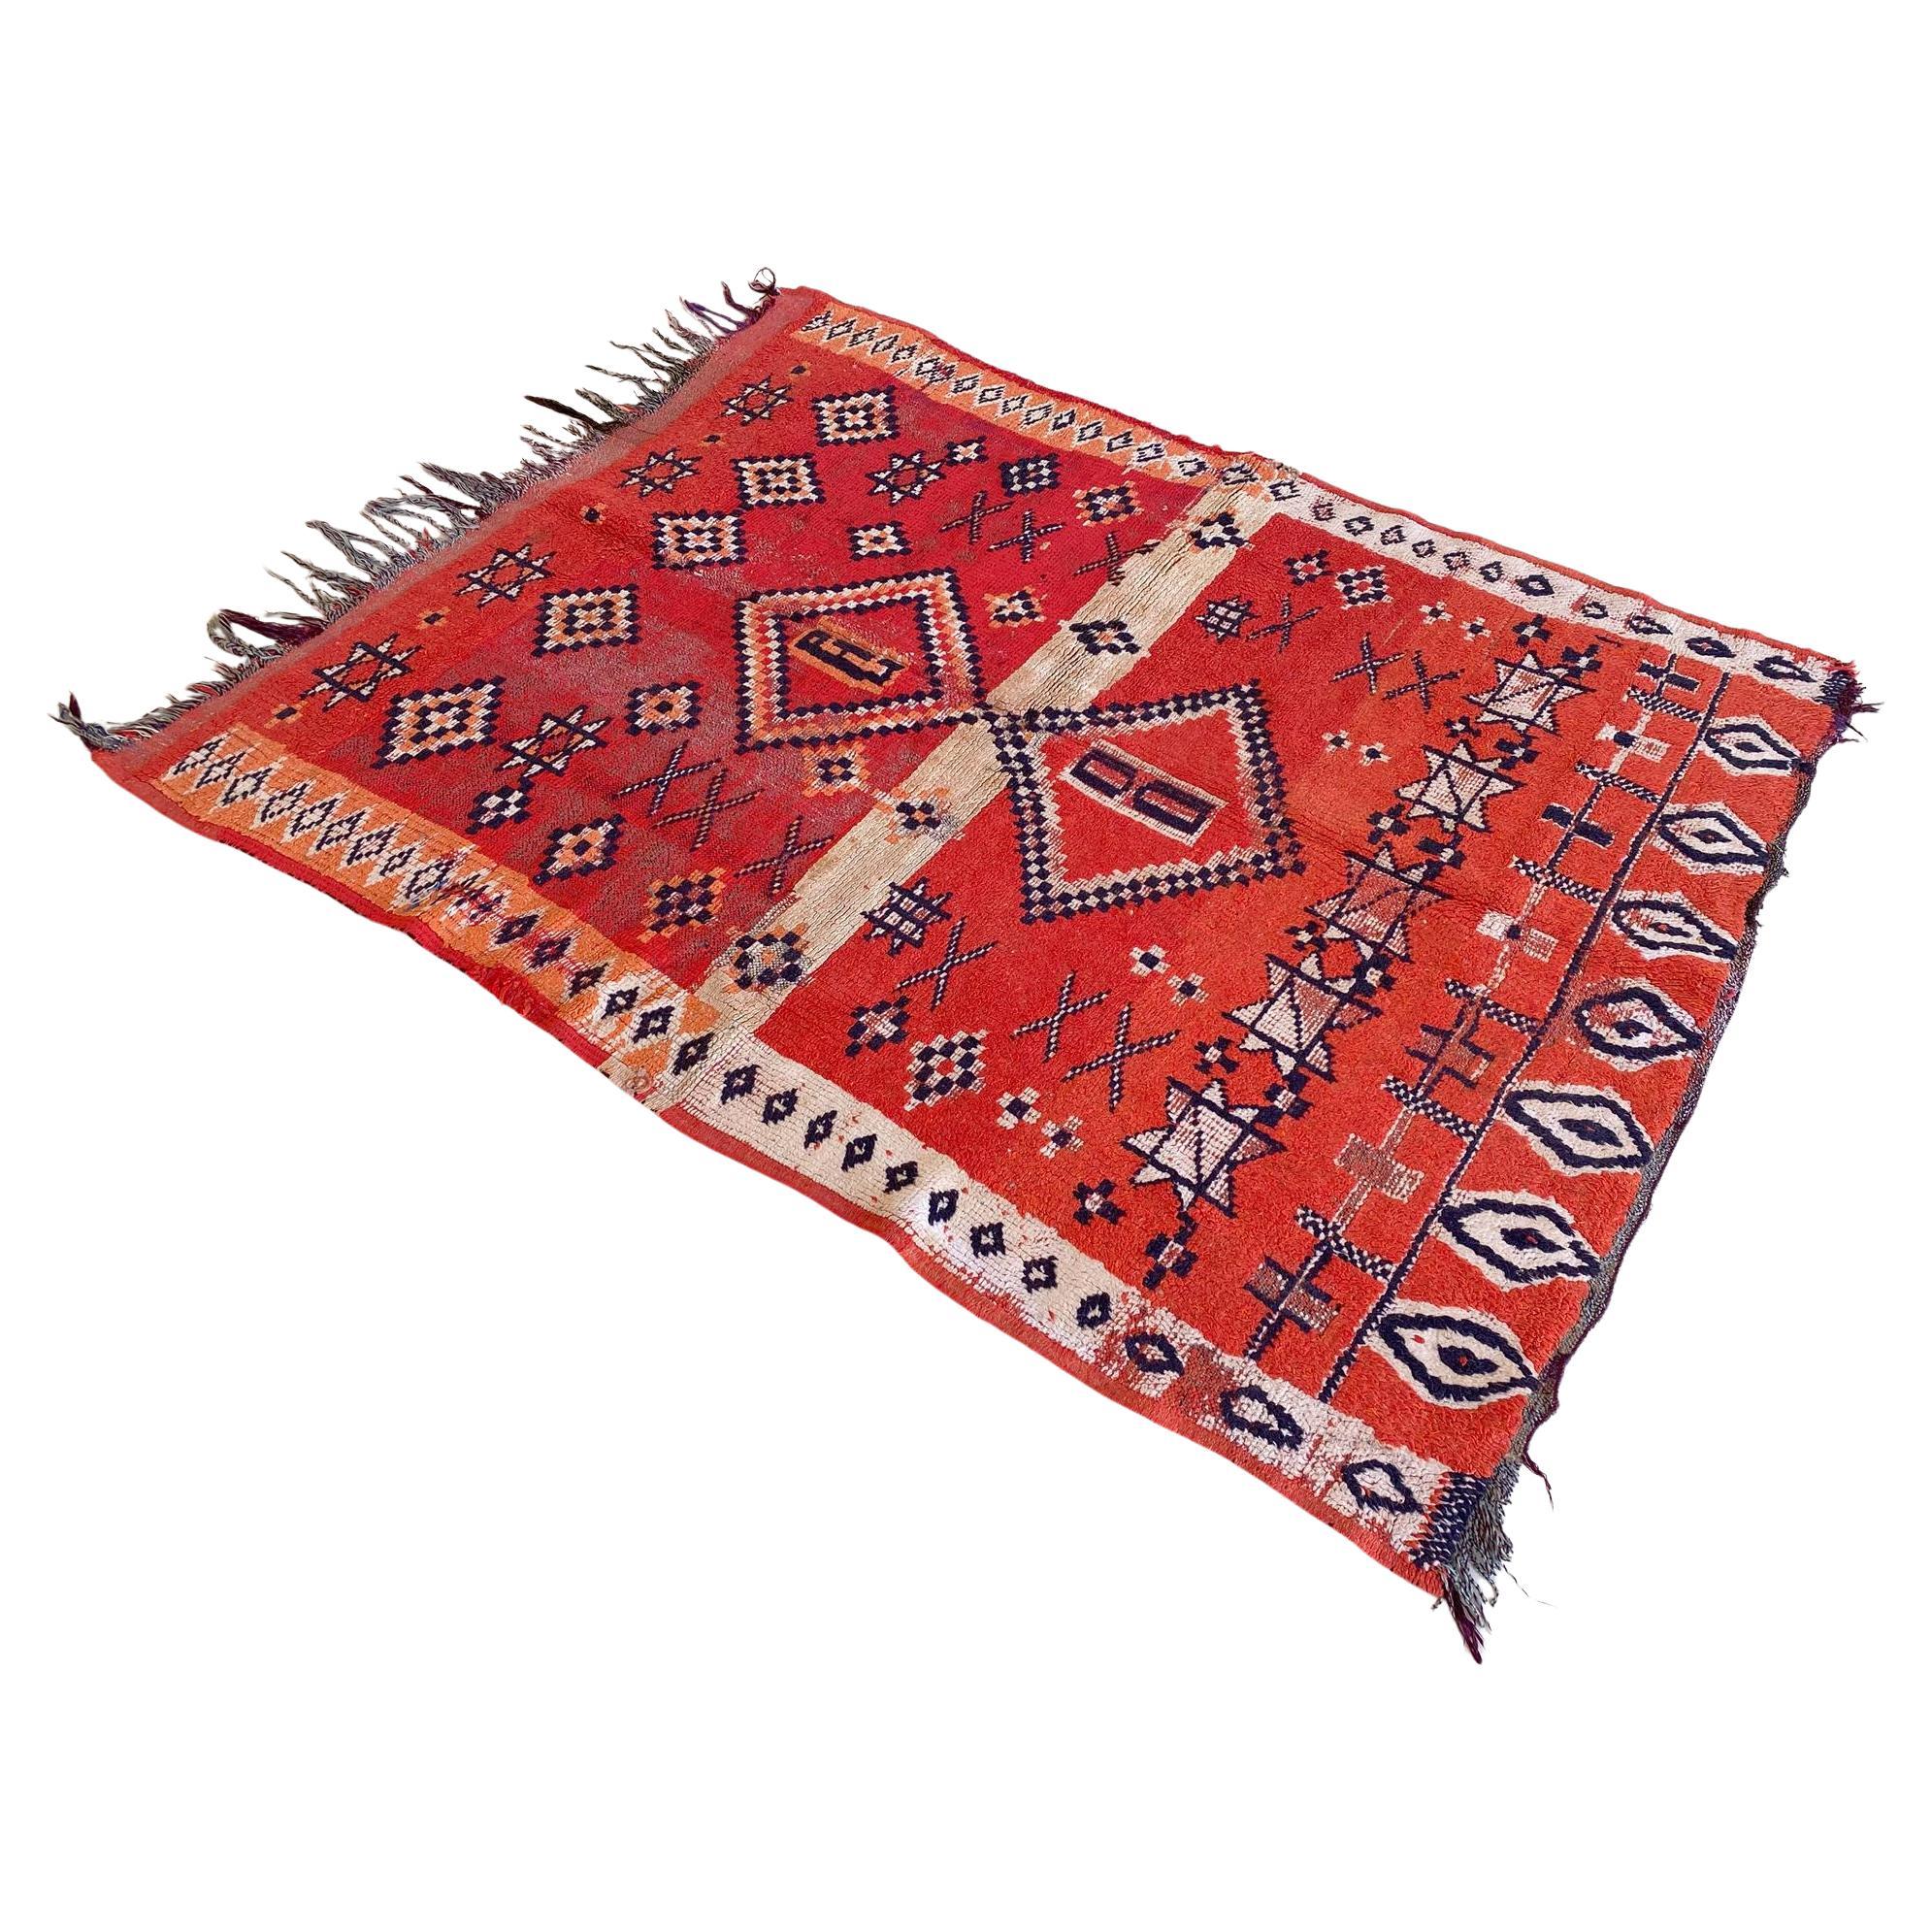 Vintage Moroccan Boujad rug - Red - 4x5feet / 124x153cm For Sale